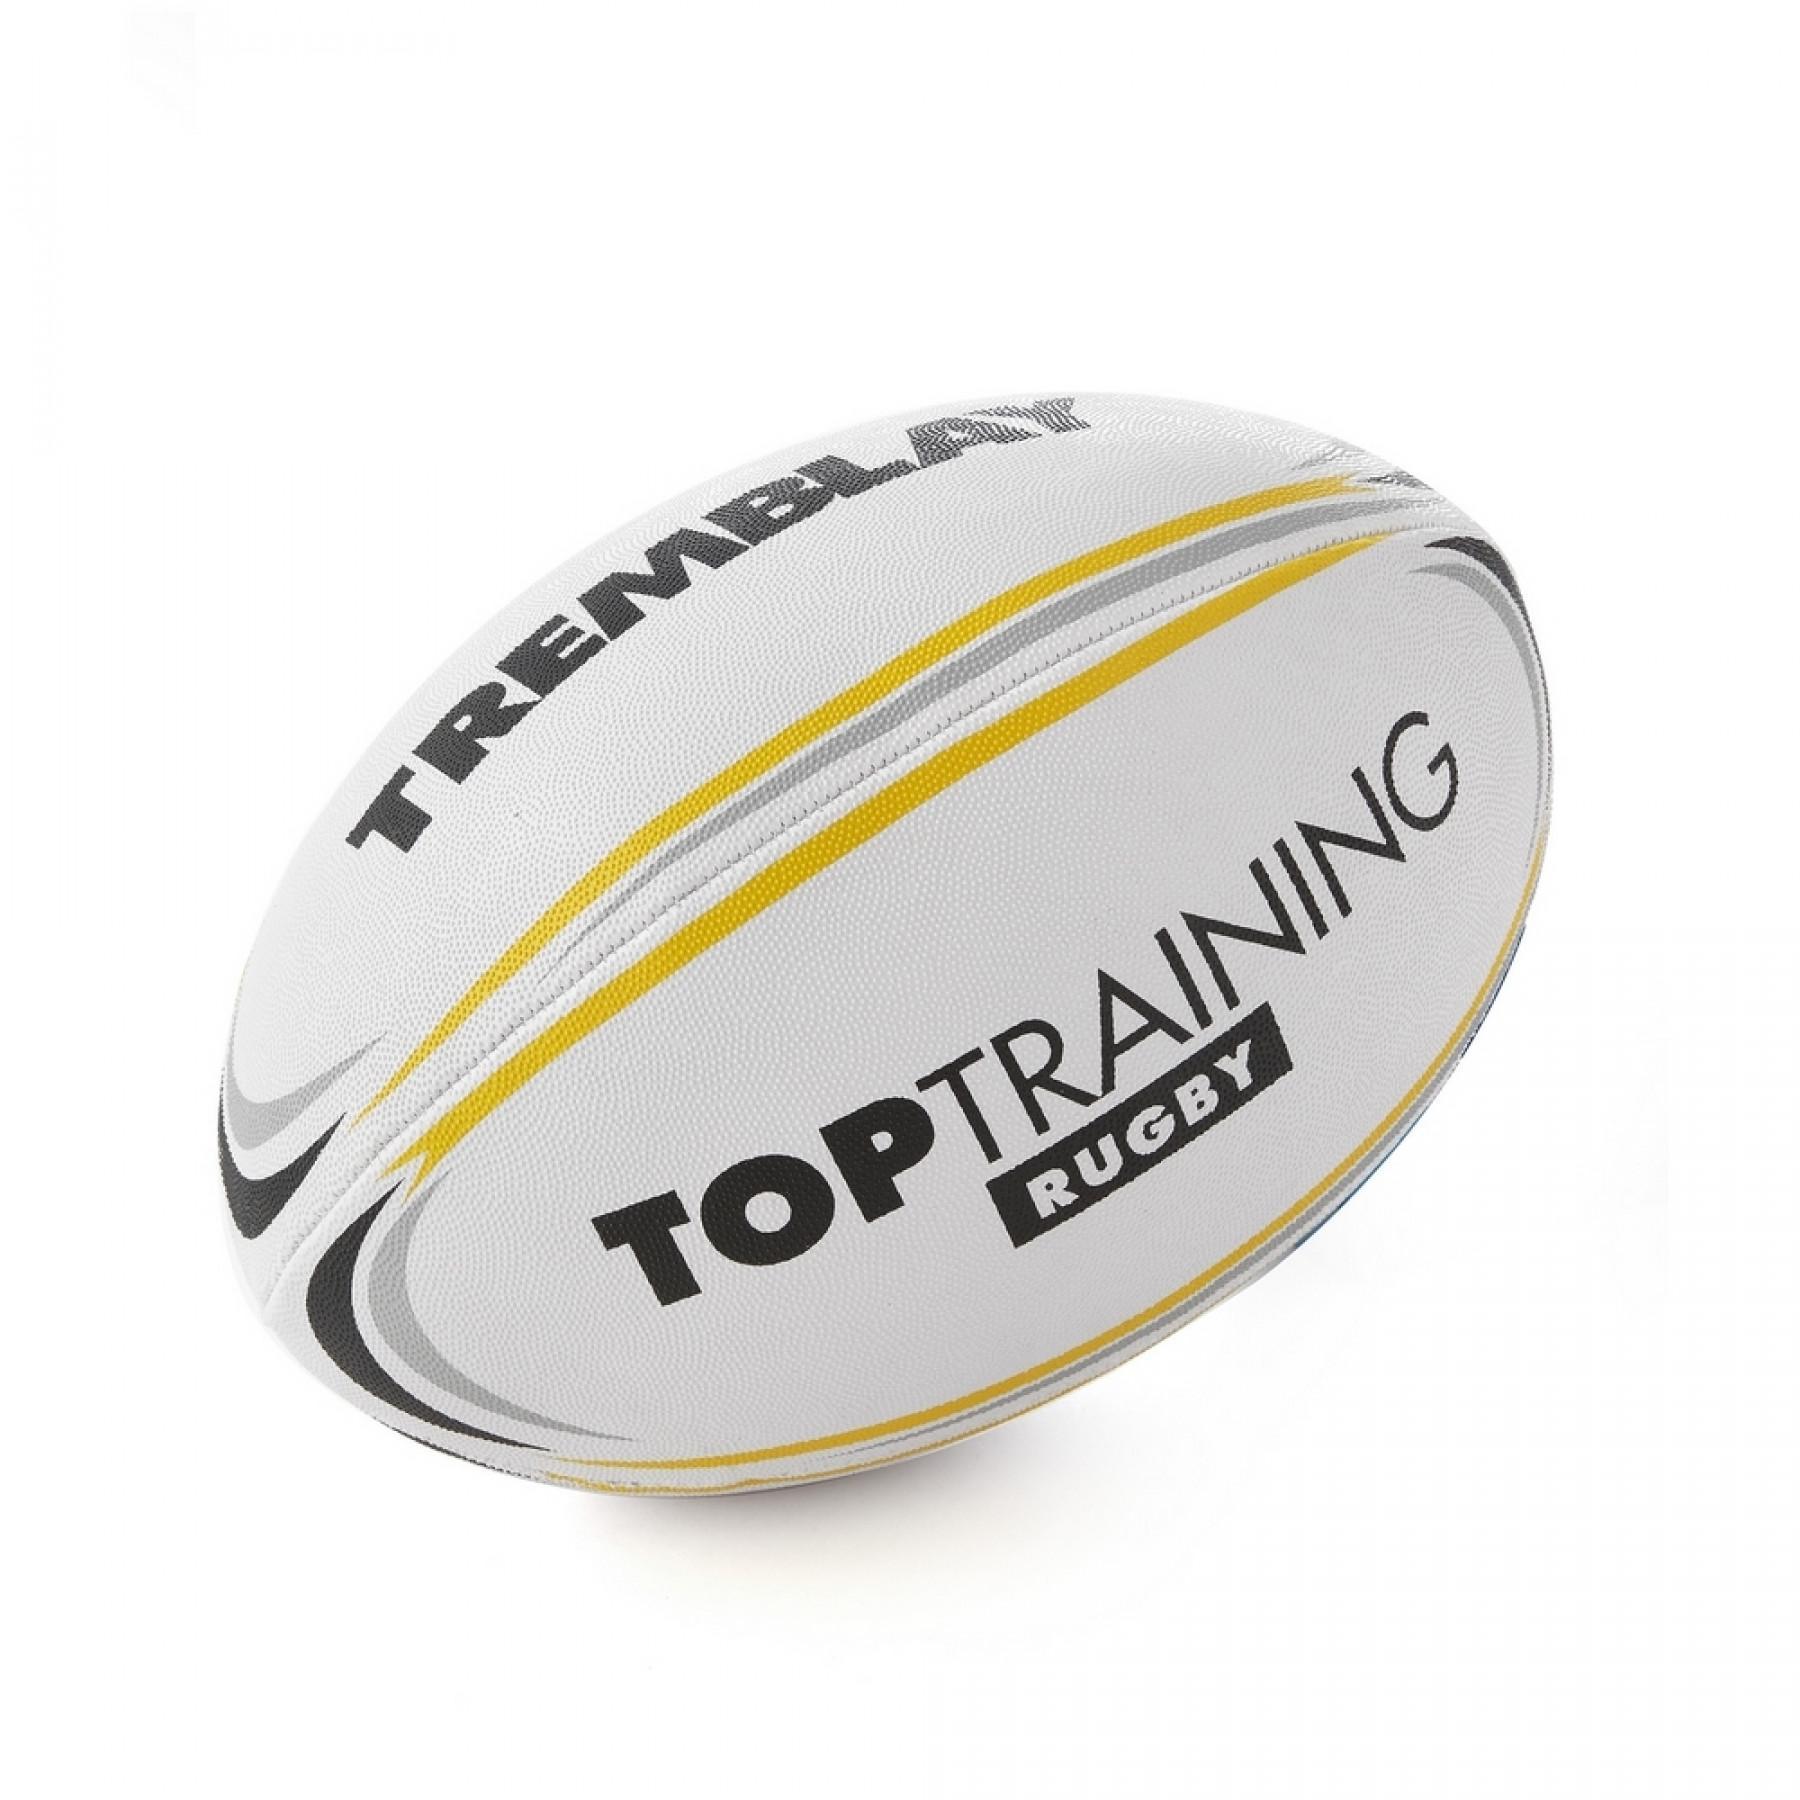 Tremblay Top-Trainings-Rugbyball